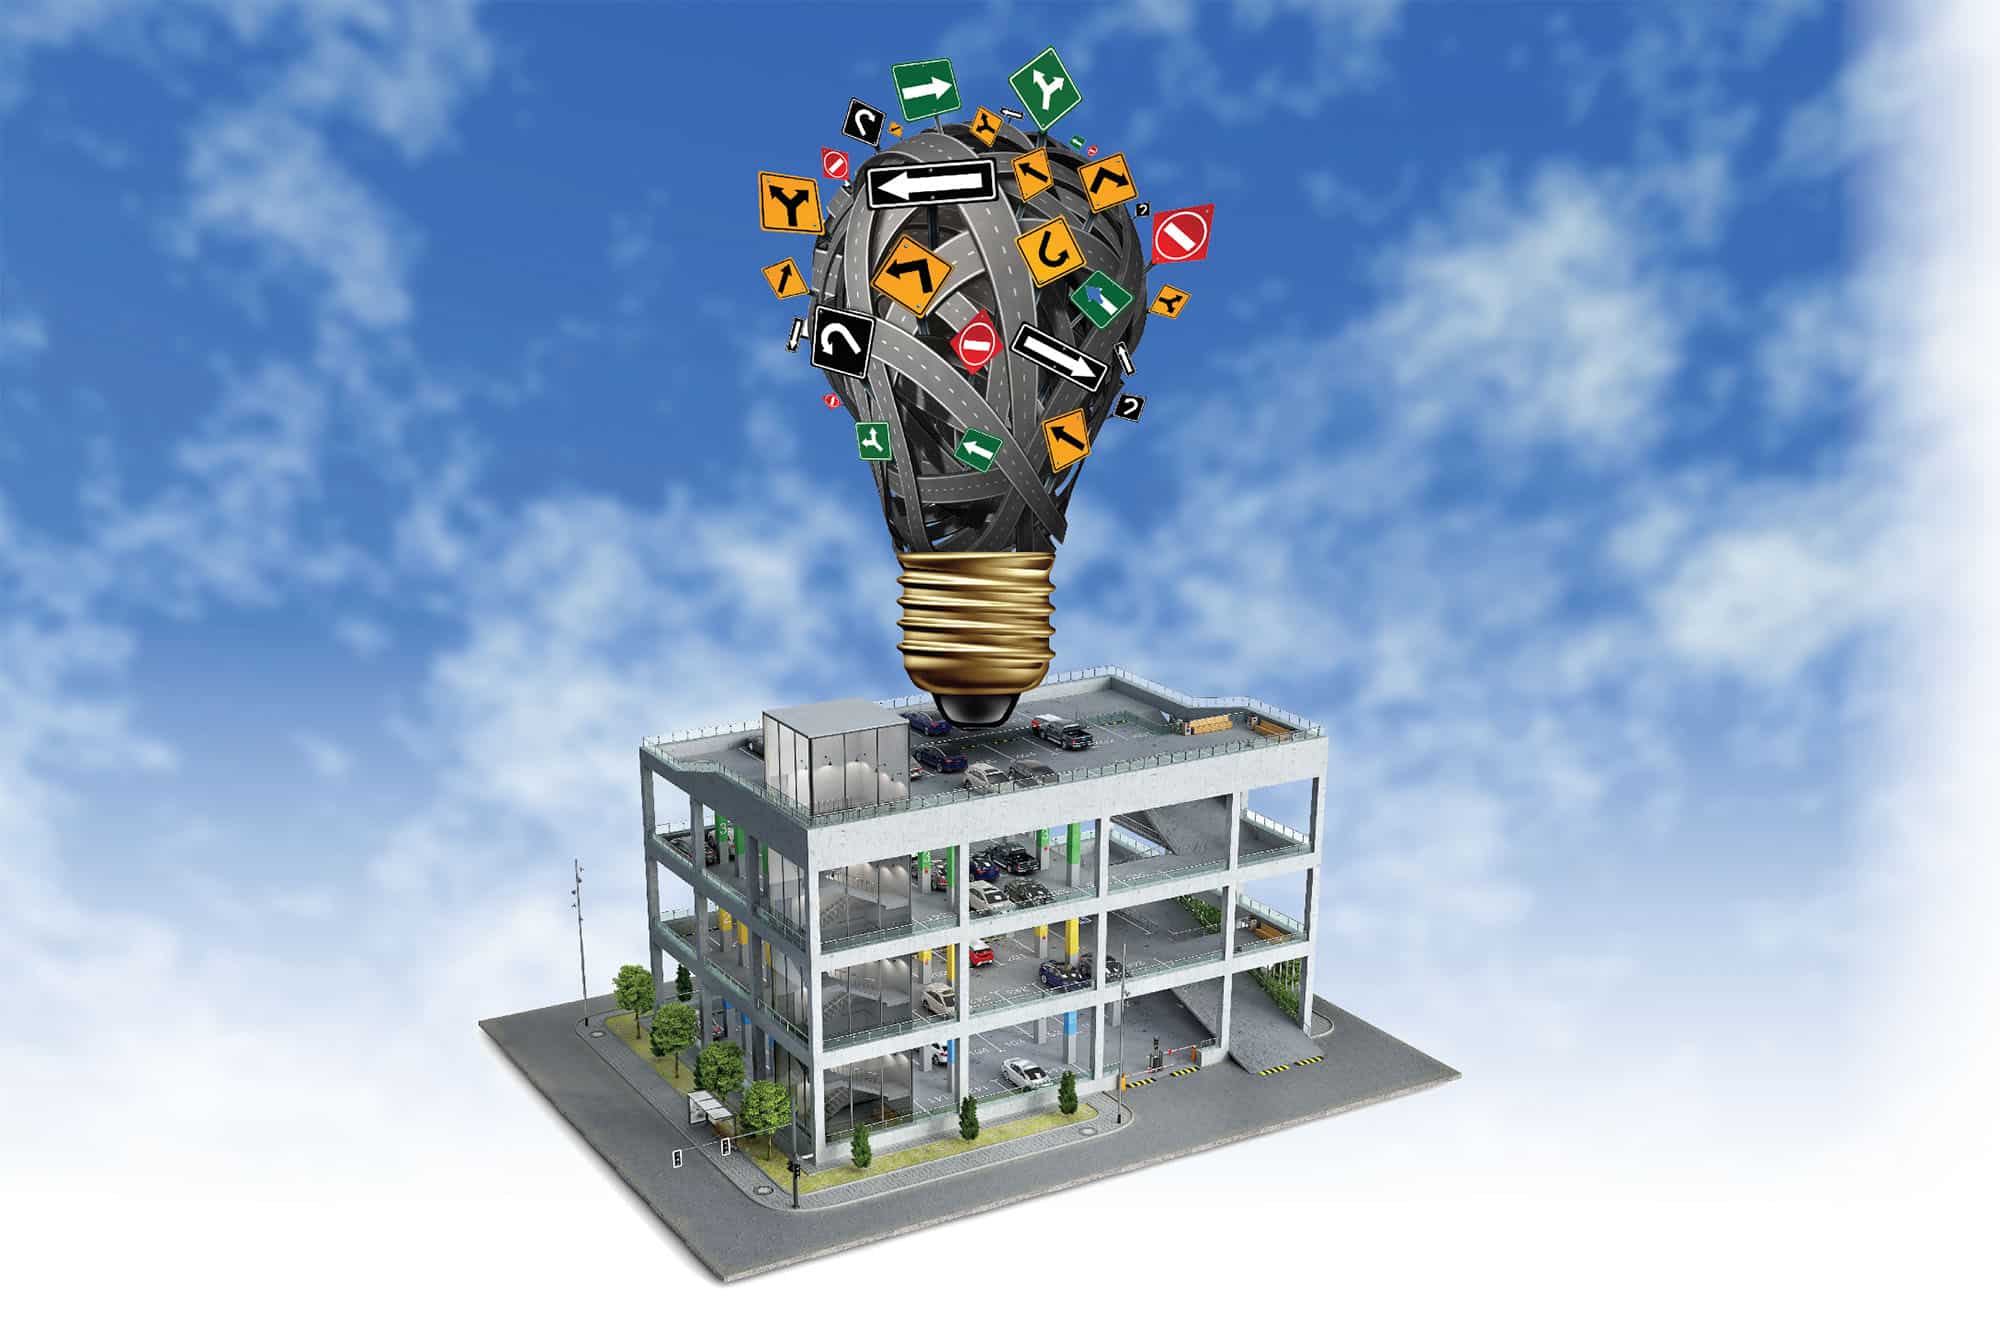 Illustration of parking garage with massive light bulb on top constructed out of roads and road signs